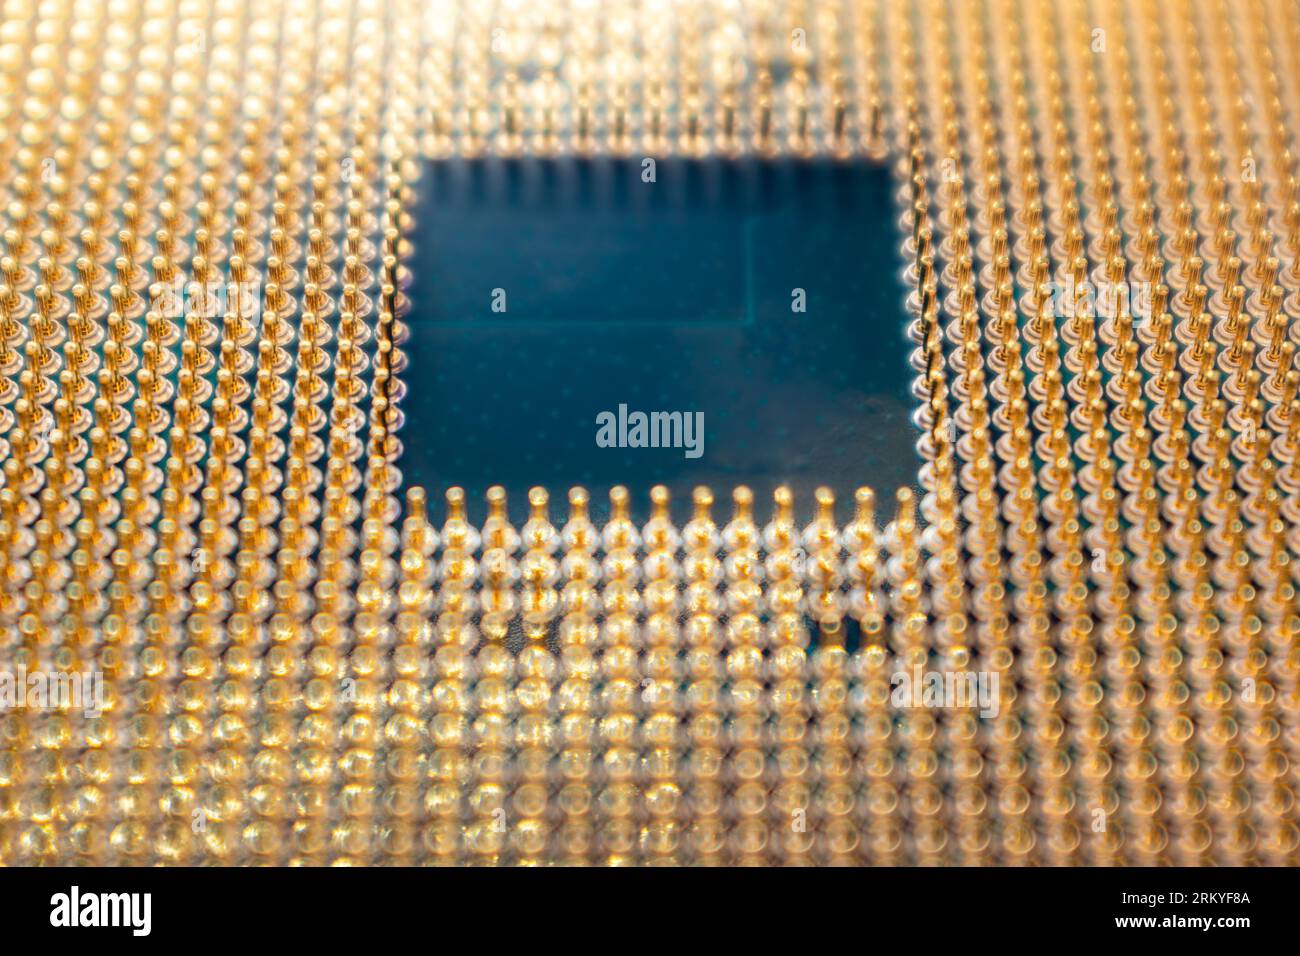 CPU microchip golden pins contacts close-up. Desktop computer computing processor unit details with blurred background Stock Photo